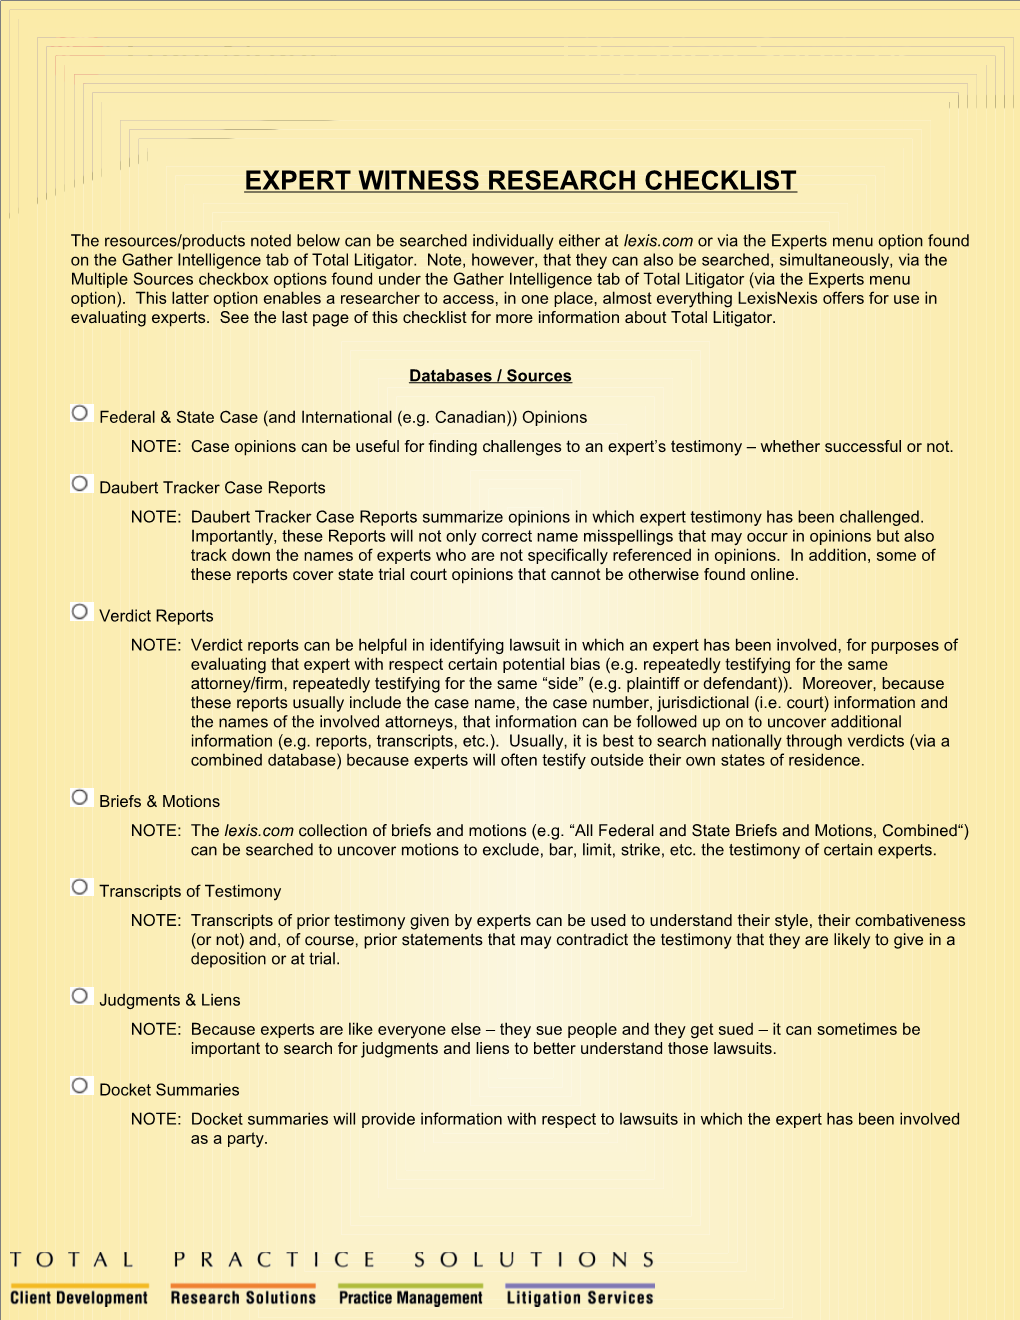 Expert Witness Research Checklist